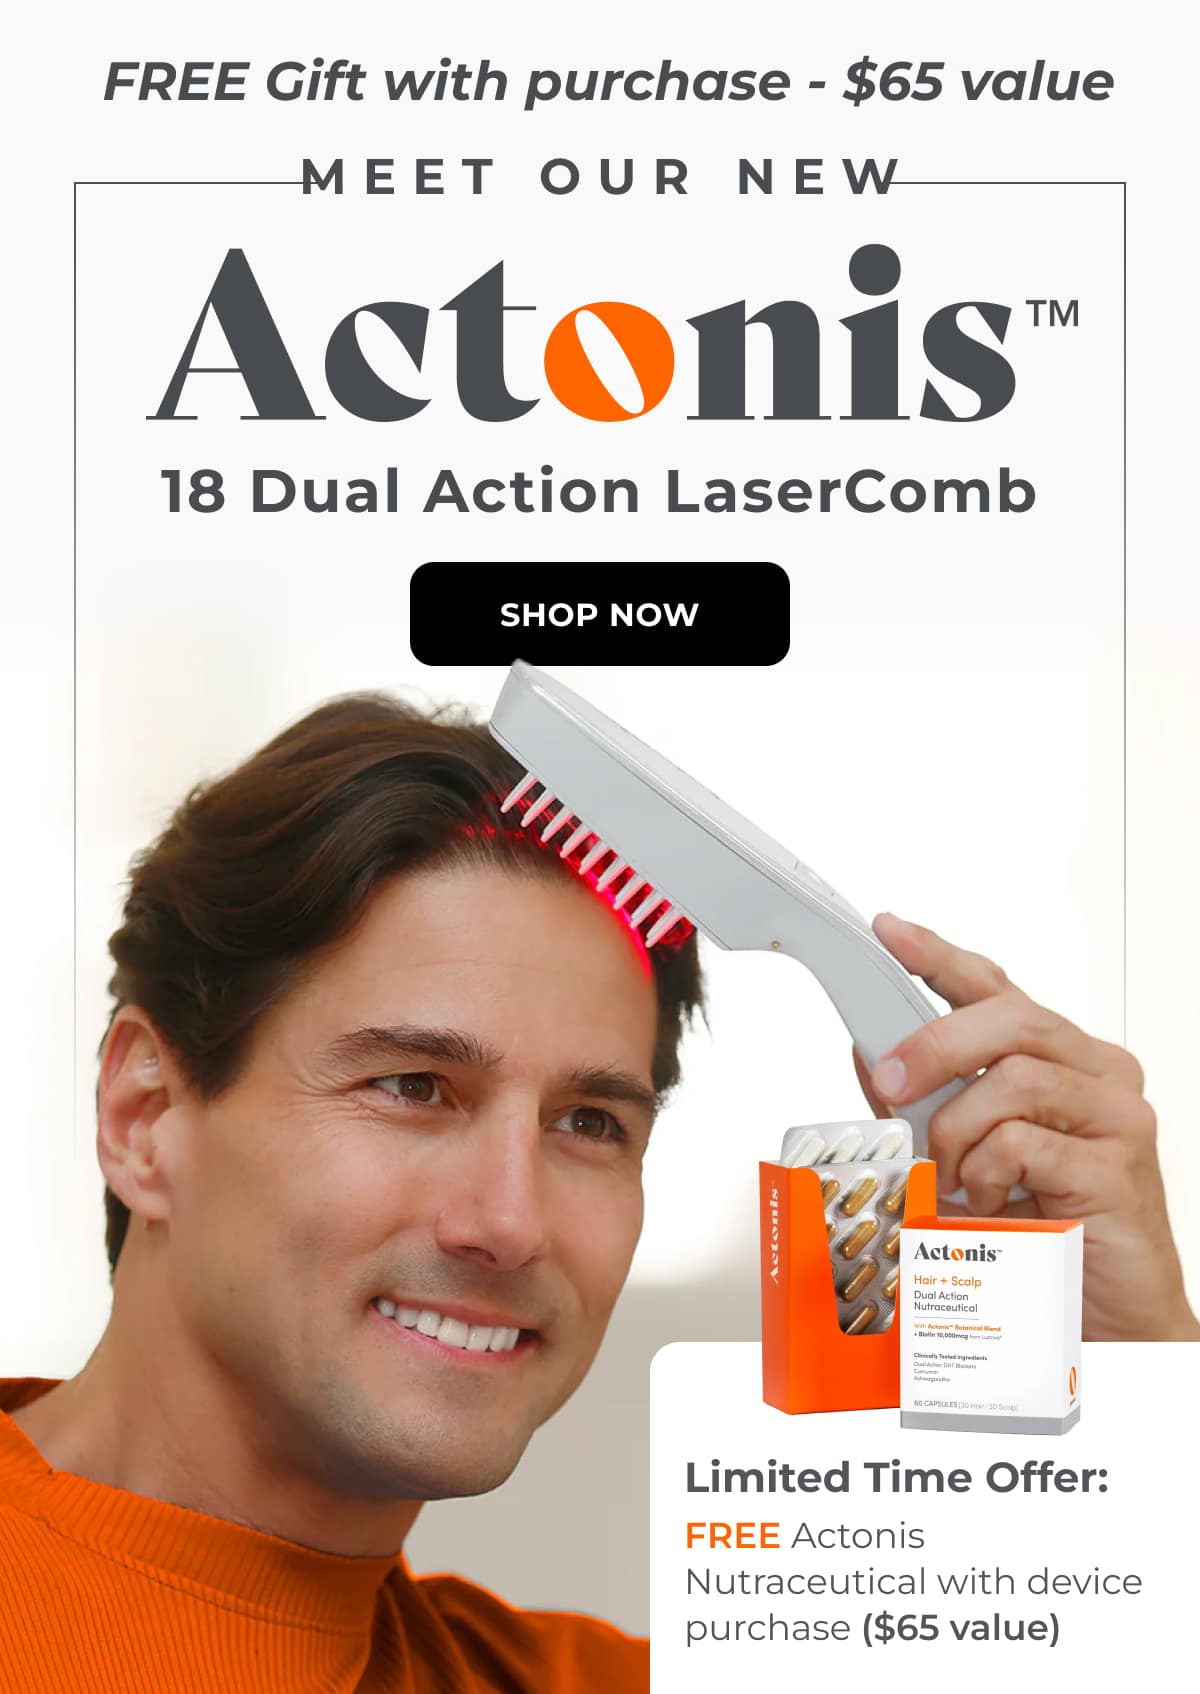 Grab Your Gift Before Its Gone. Buy Our Actonis 18 Dual Action LaserComb, Get a FREE Actonis Hair & Scalp Nutraceutical SHOP NOW